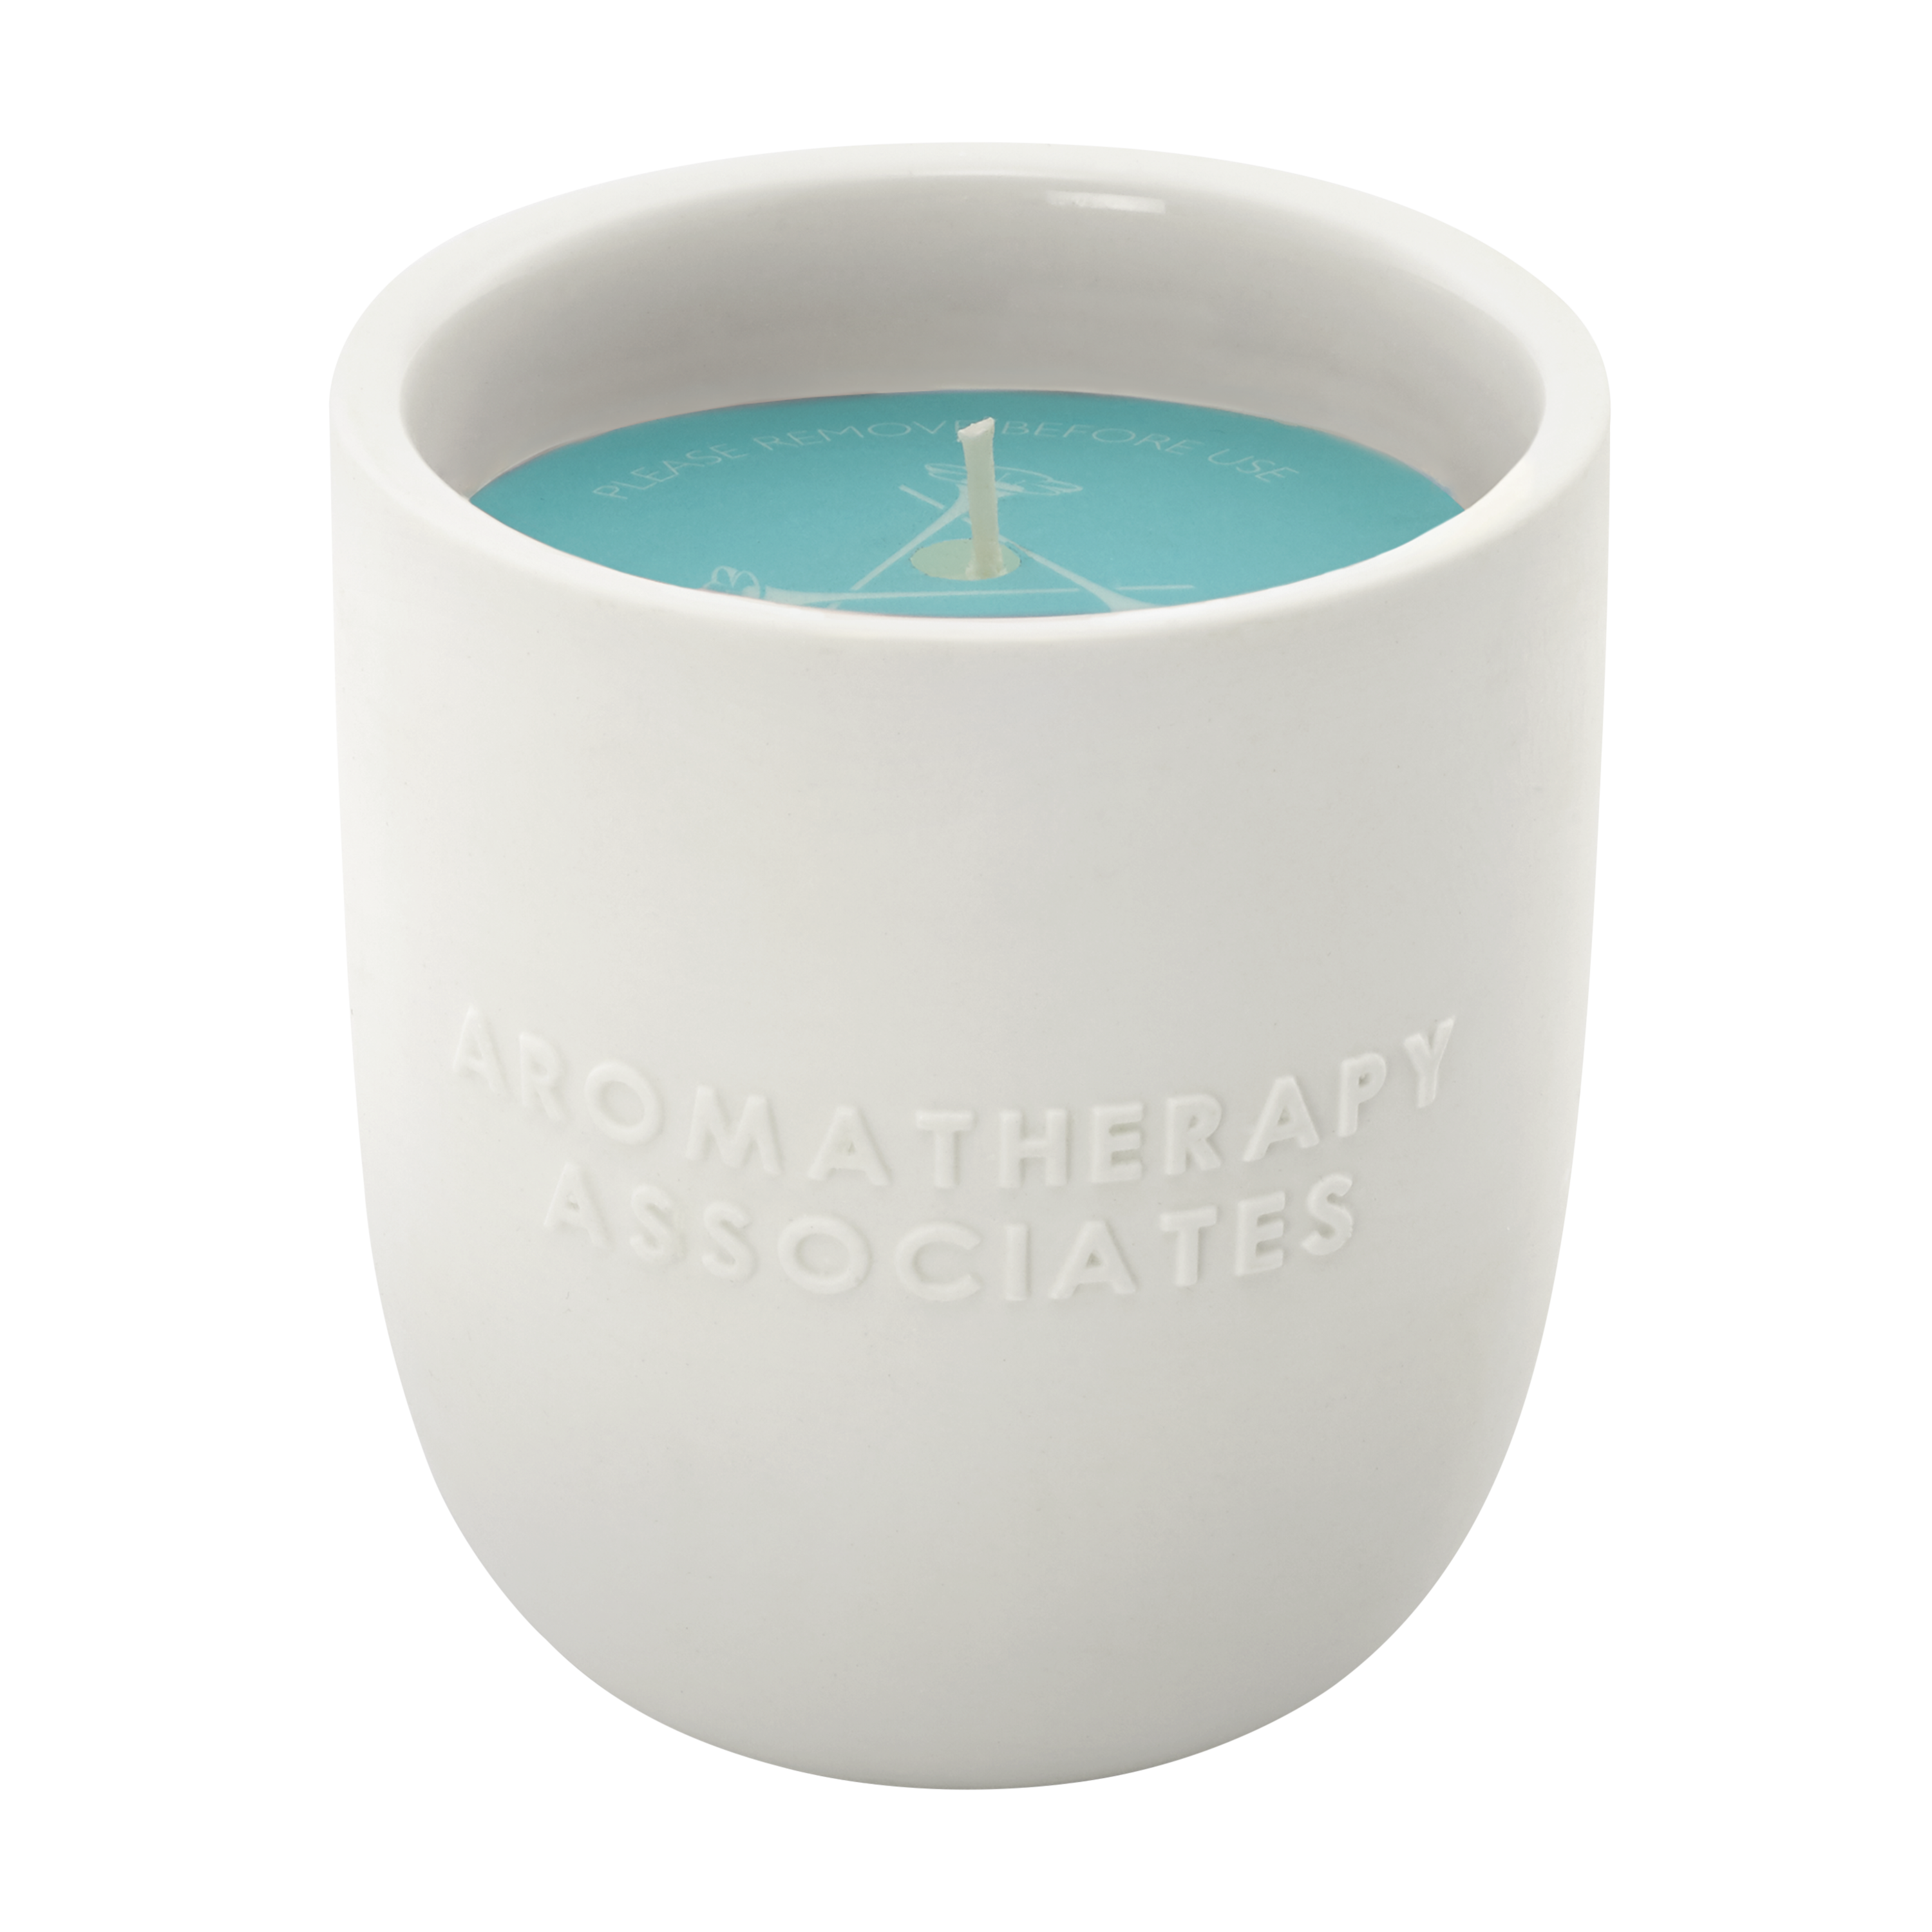 Revive Candle 200g Aromatherapy Associates